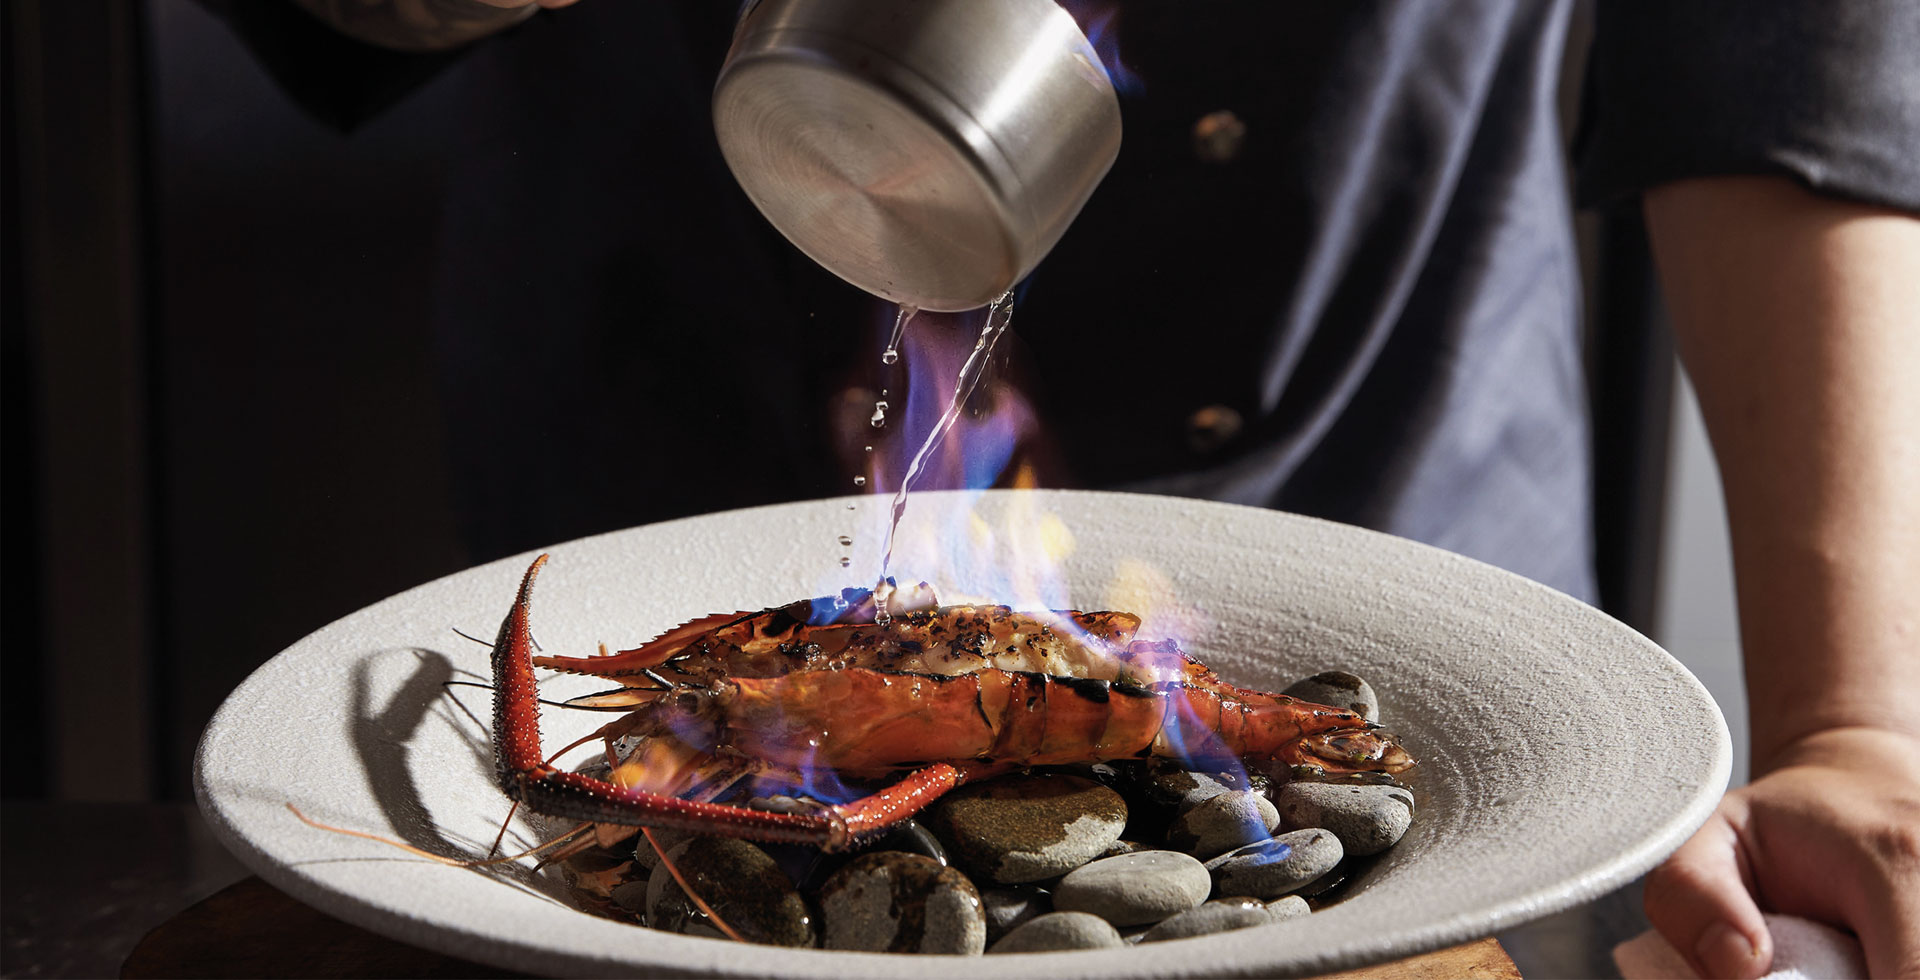 A lobster in a shallow plate being doused in fire.